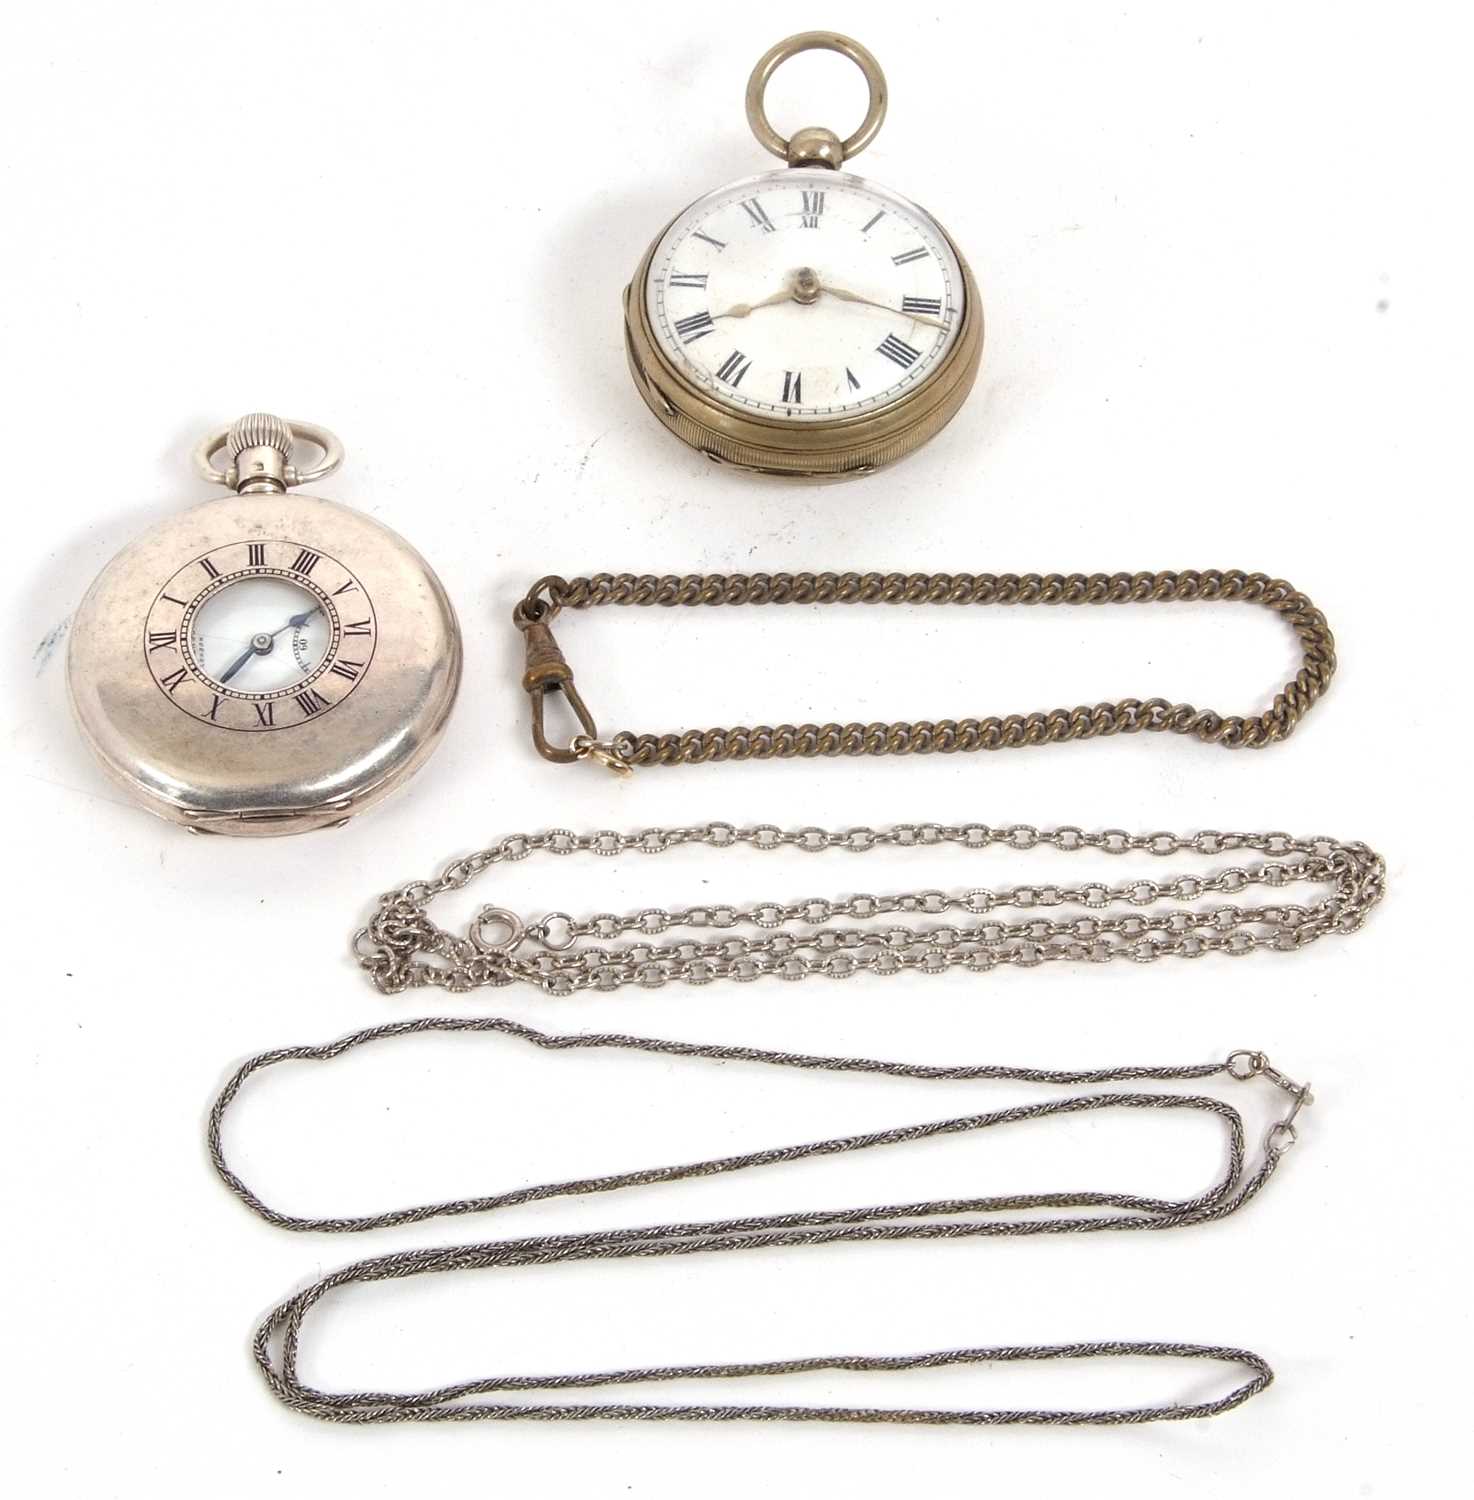 A mixed lot of two pocket watches and three metal chains, one of the pocket watches is a silver J